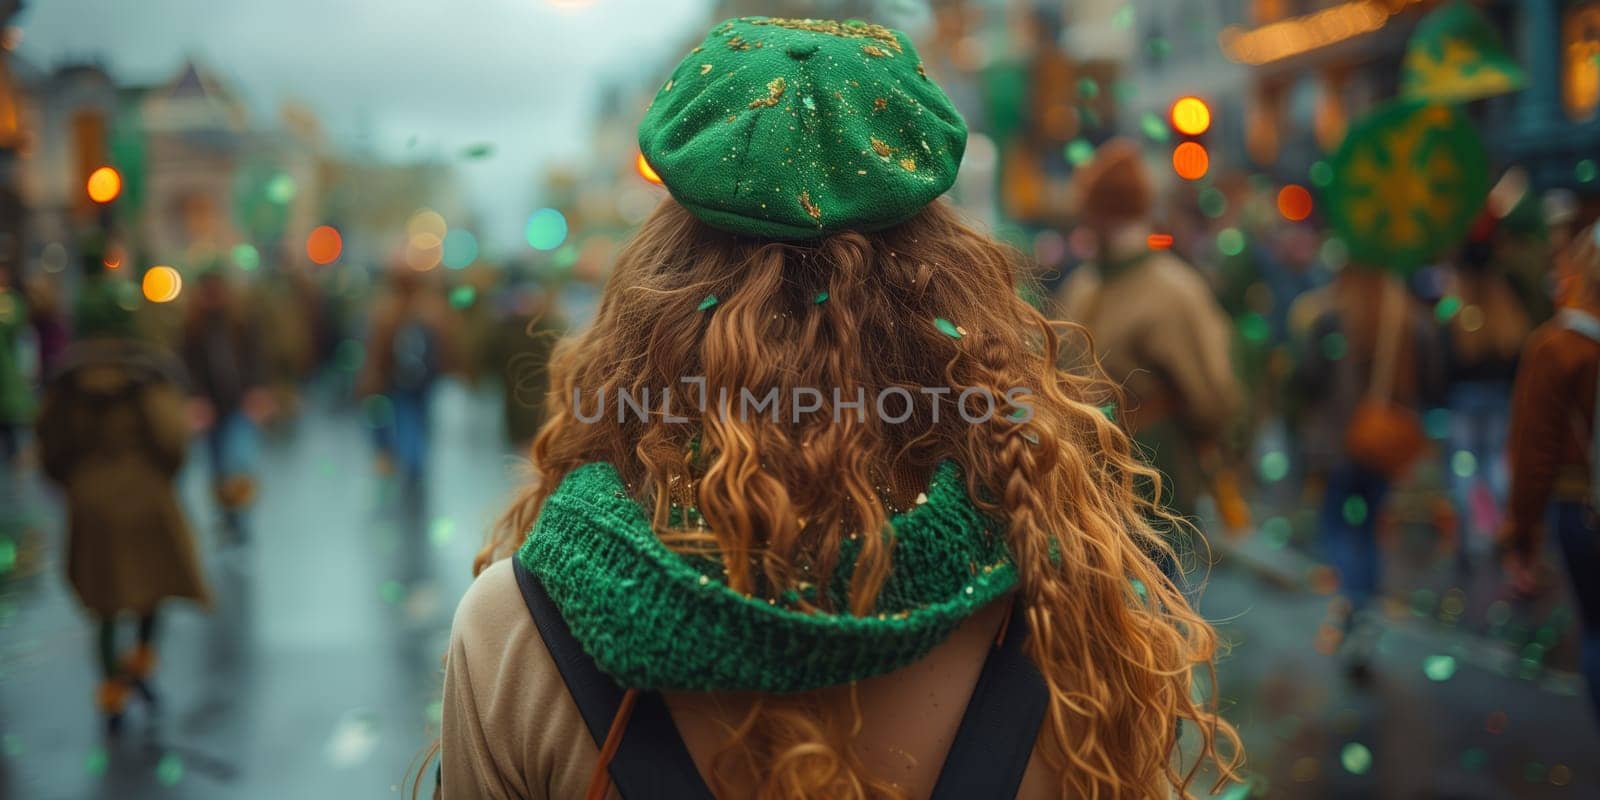 A woman in a stylish green hat and scarf is strolling down the street, adding a festive touch to the event. Her fashion accessories bring fun to the surroundings